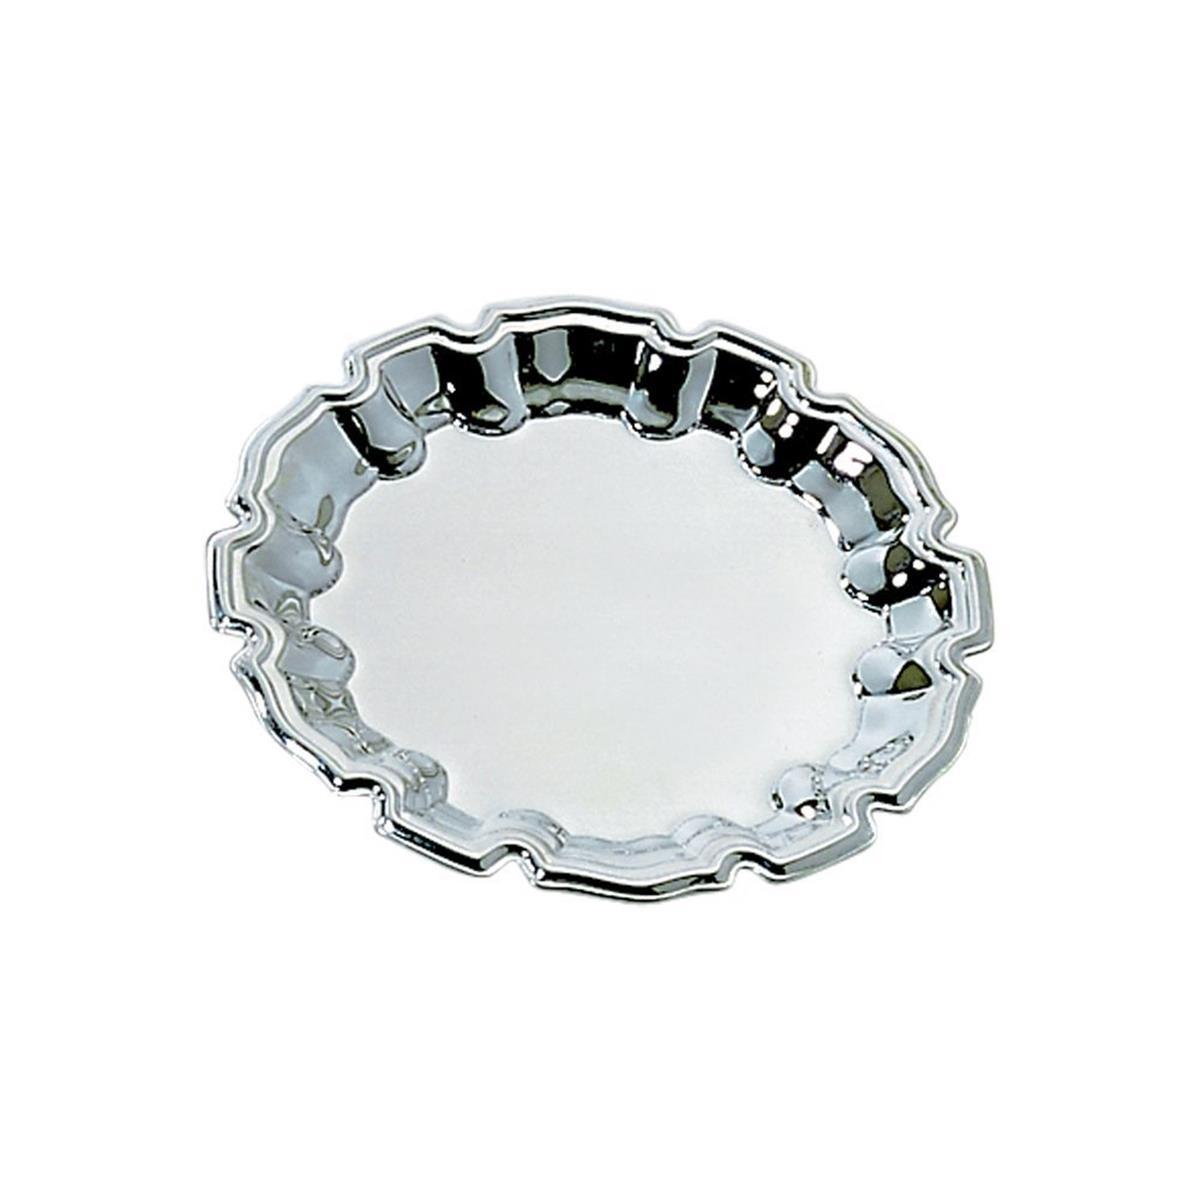 025101 7 In. Stainless Steel Chippendale Tray